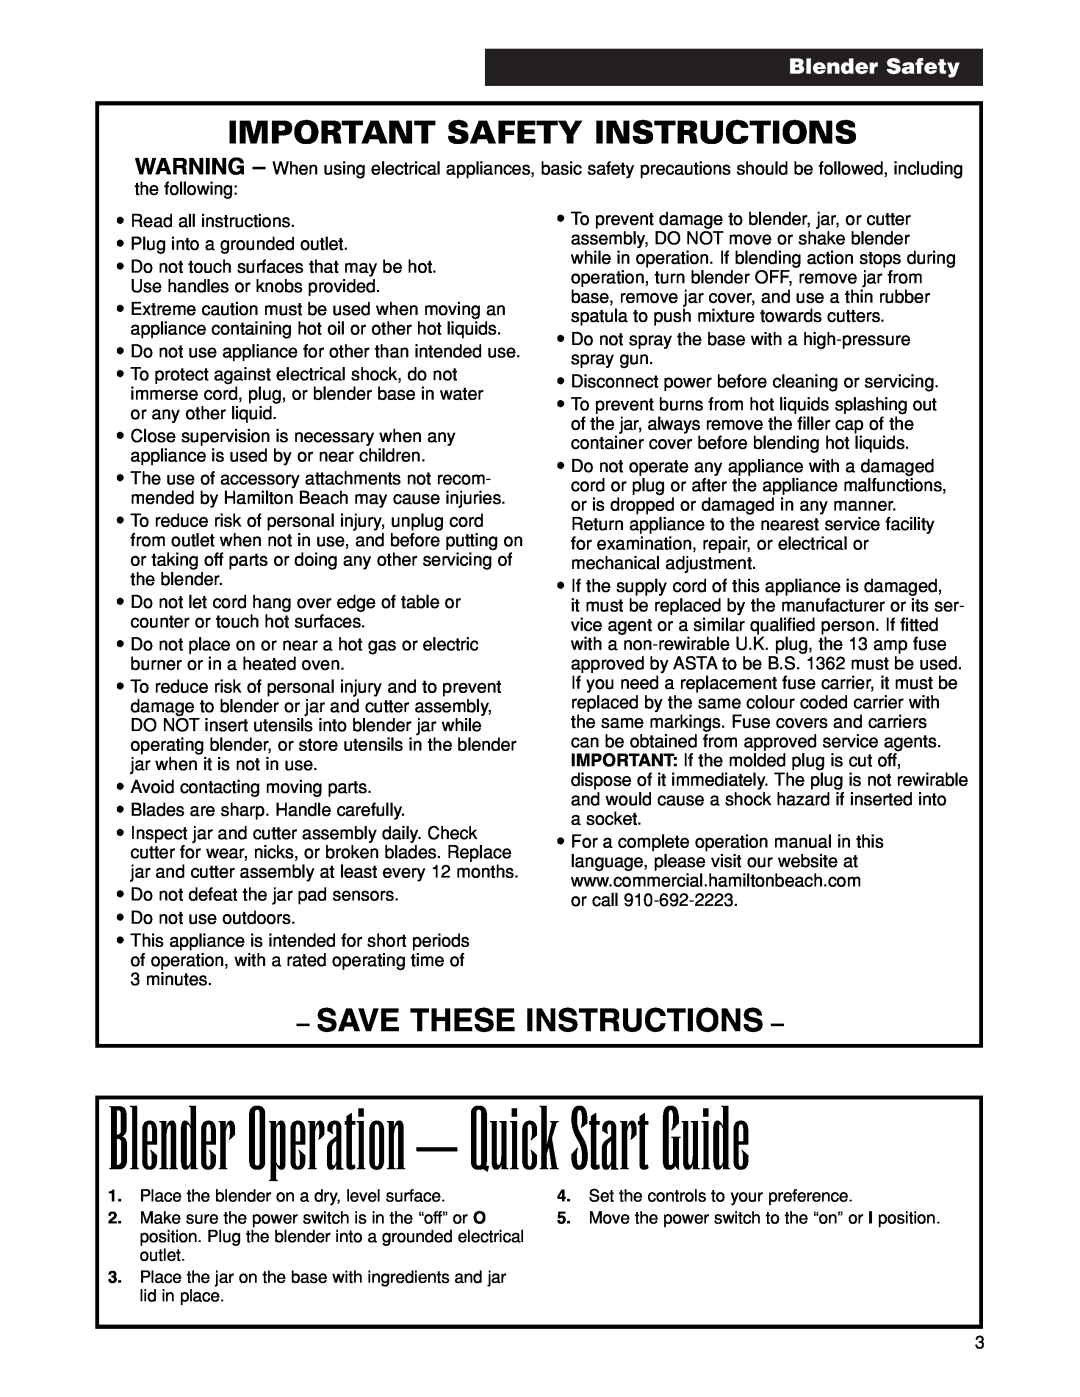 Hamilton Beach 908, 901, 919 Blender Operation - Quick Start Guide, Important Safety Instructions, Save These Instructions 